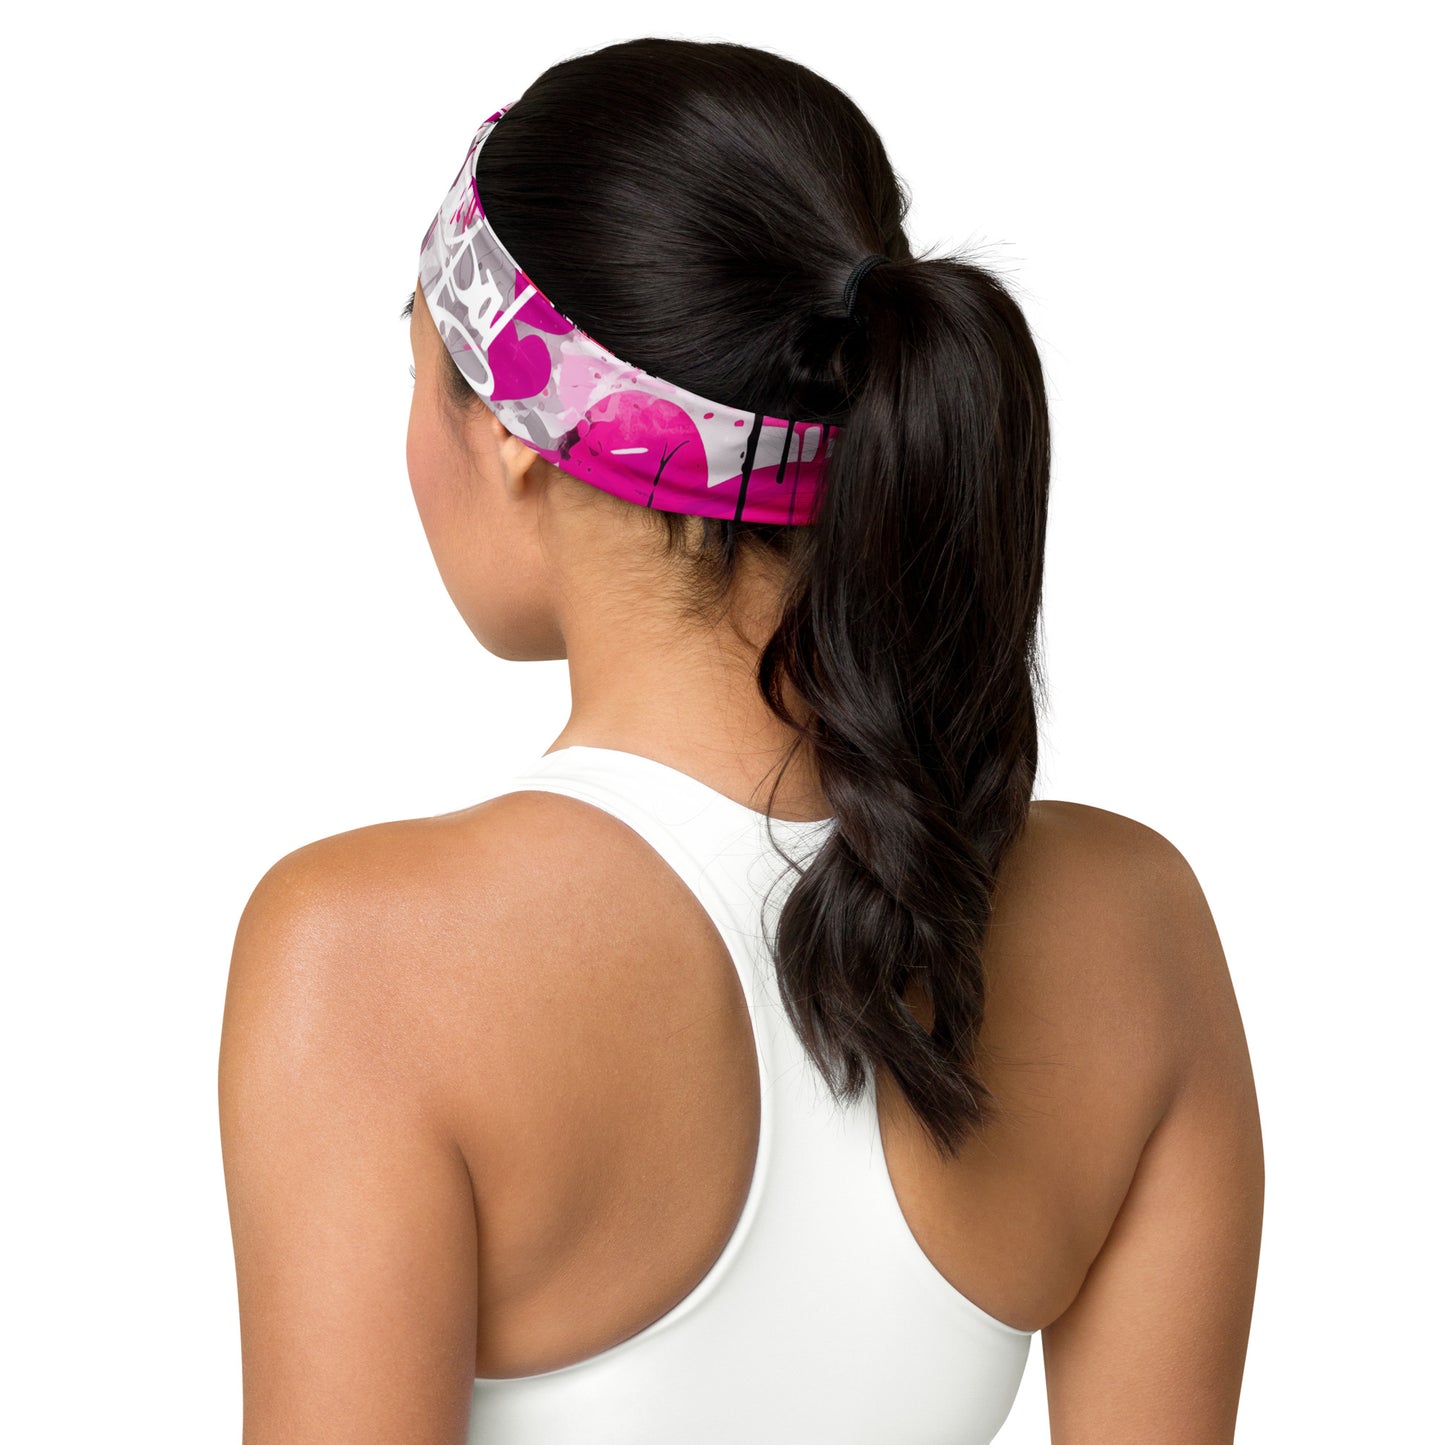 Versatile Wear: Transition effortlessly from your workout routine to a fashion-forward accessory. The MeaKulpa Headband adapts to your lifestyle, bringing comfort and flair to every moment.